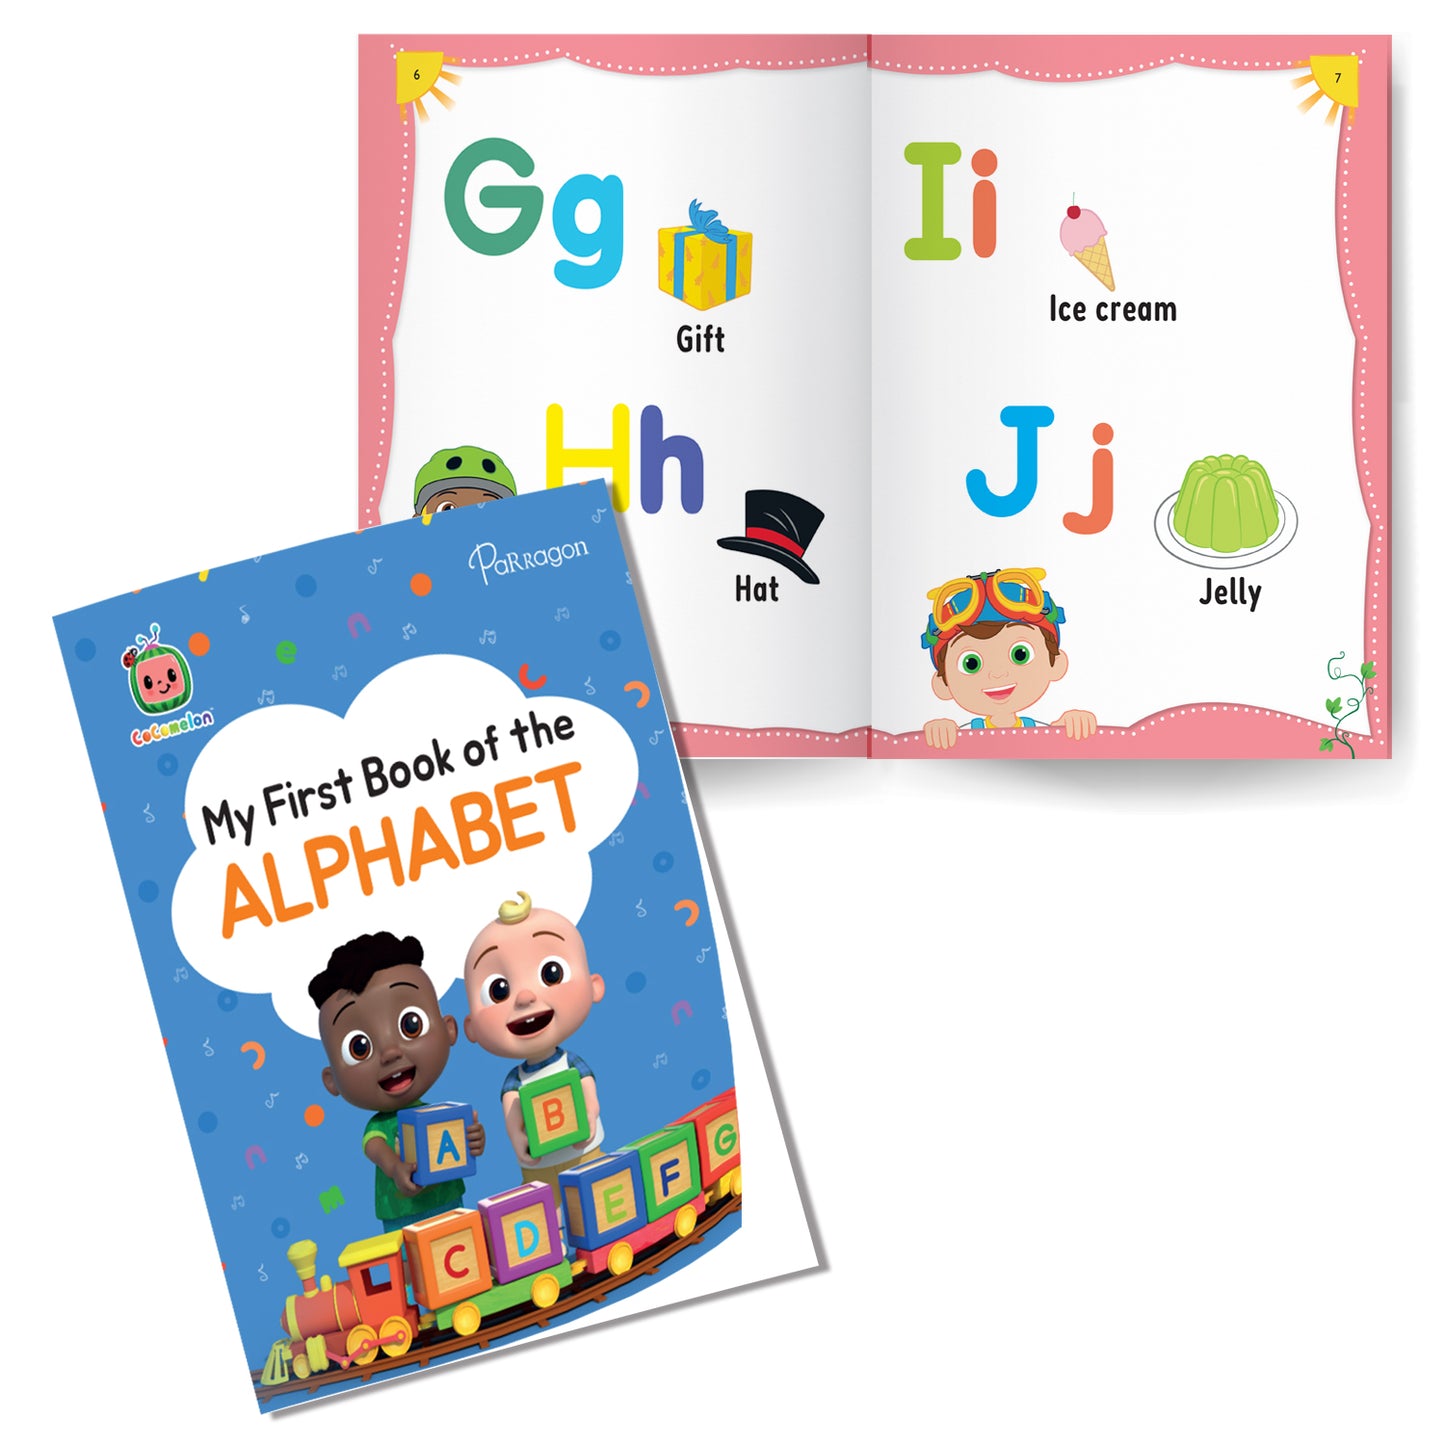 CoComelon My First Set of 3 Early Learning Books | Learn About Shapes, Alphabet & Numbers | Early Learning Books For 3 to 6 Year Old